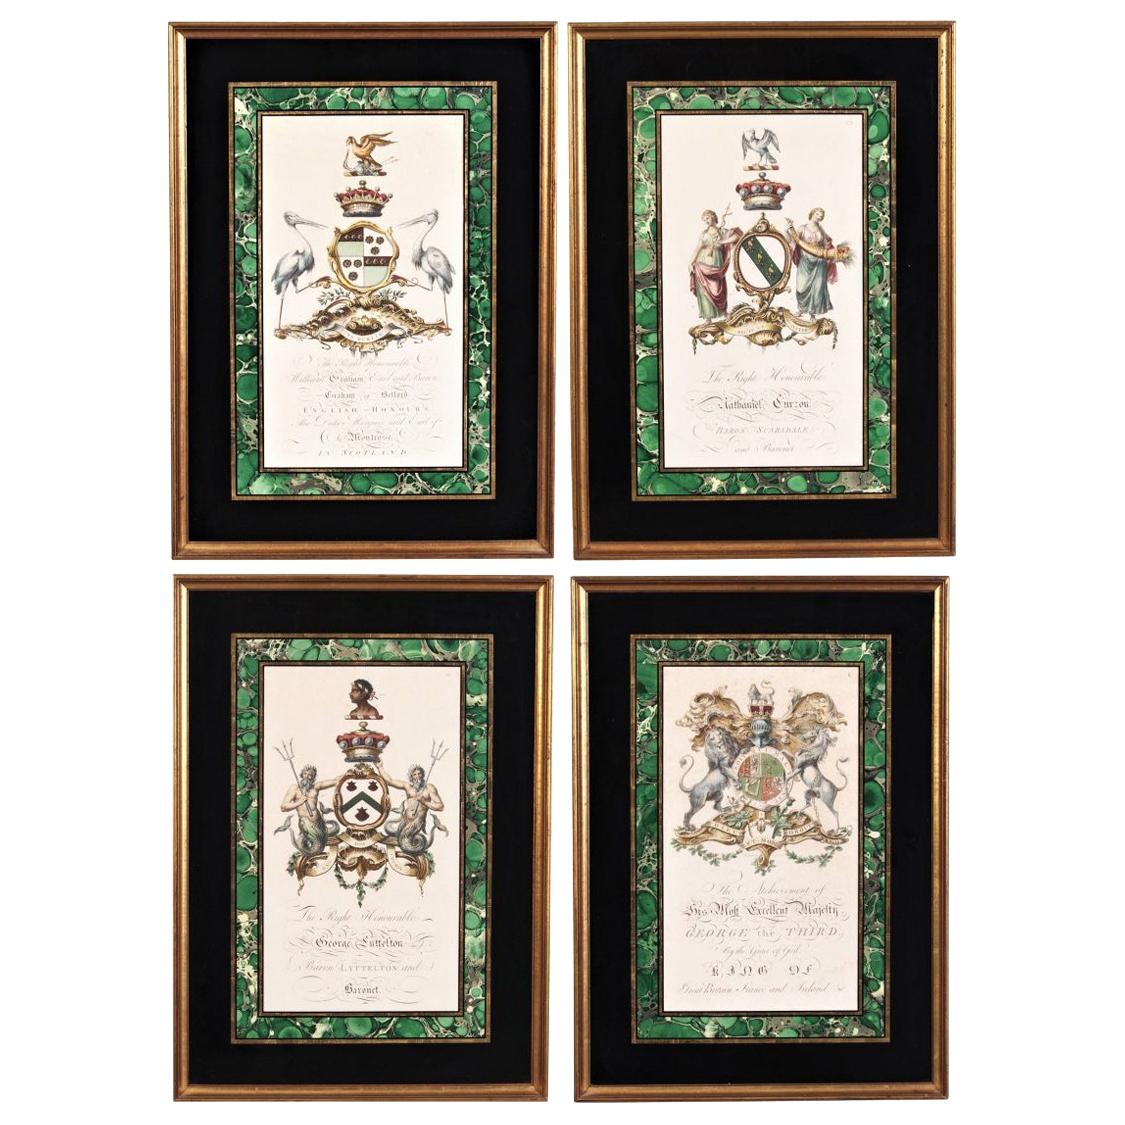 Set of Four Antique Engravings in Reverse Painted Frames